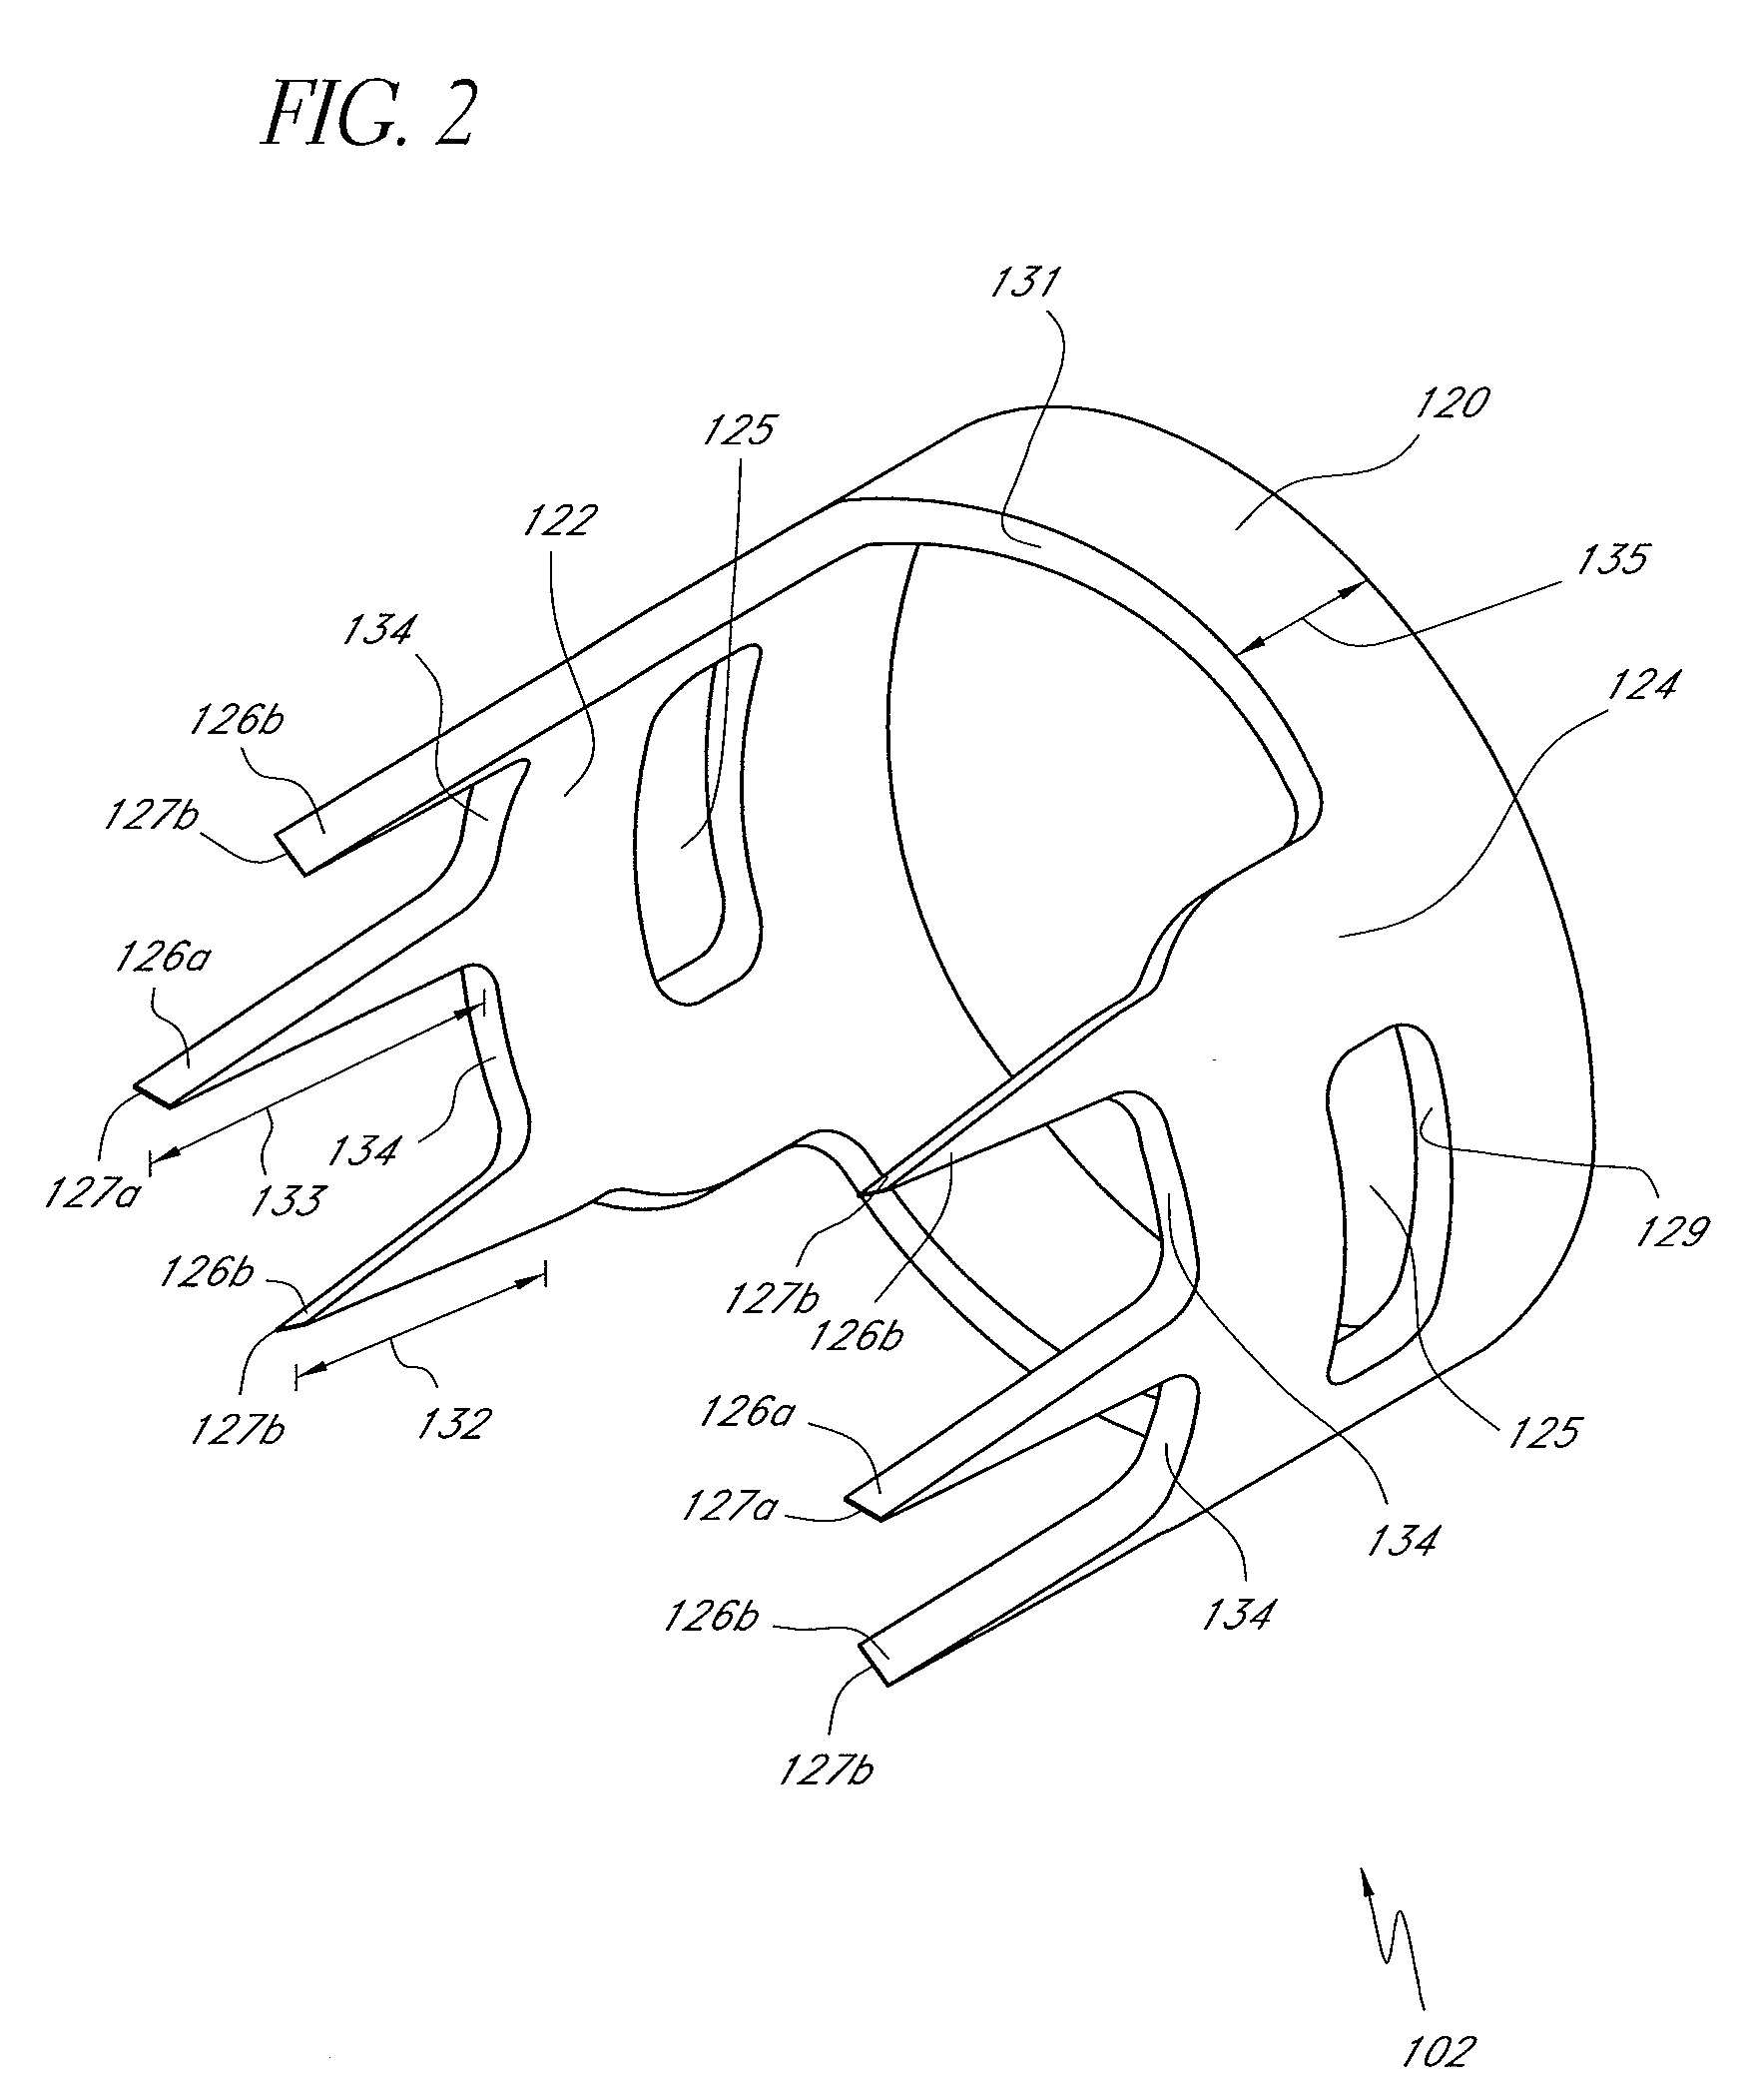 Vascular closure devices, systems, and methods of use